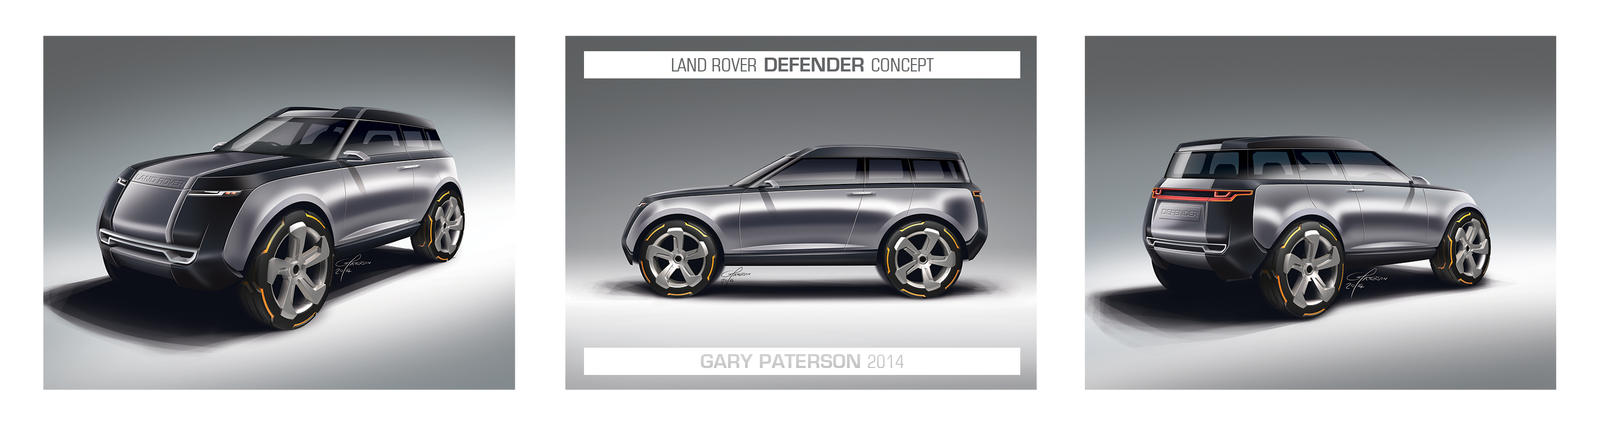 land_rover_final_renders_by_garyjpaterson-d7iquf1.jpg